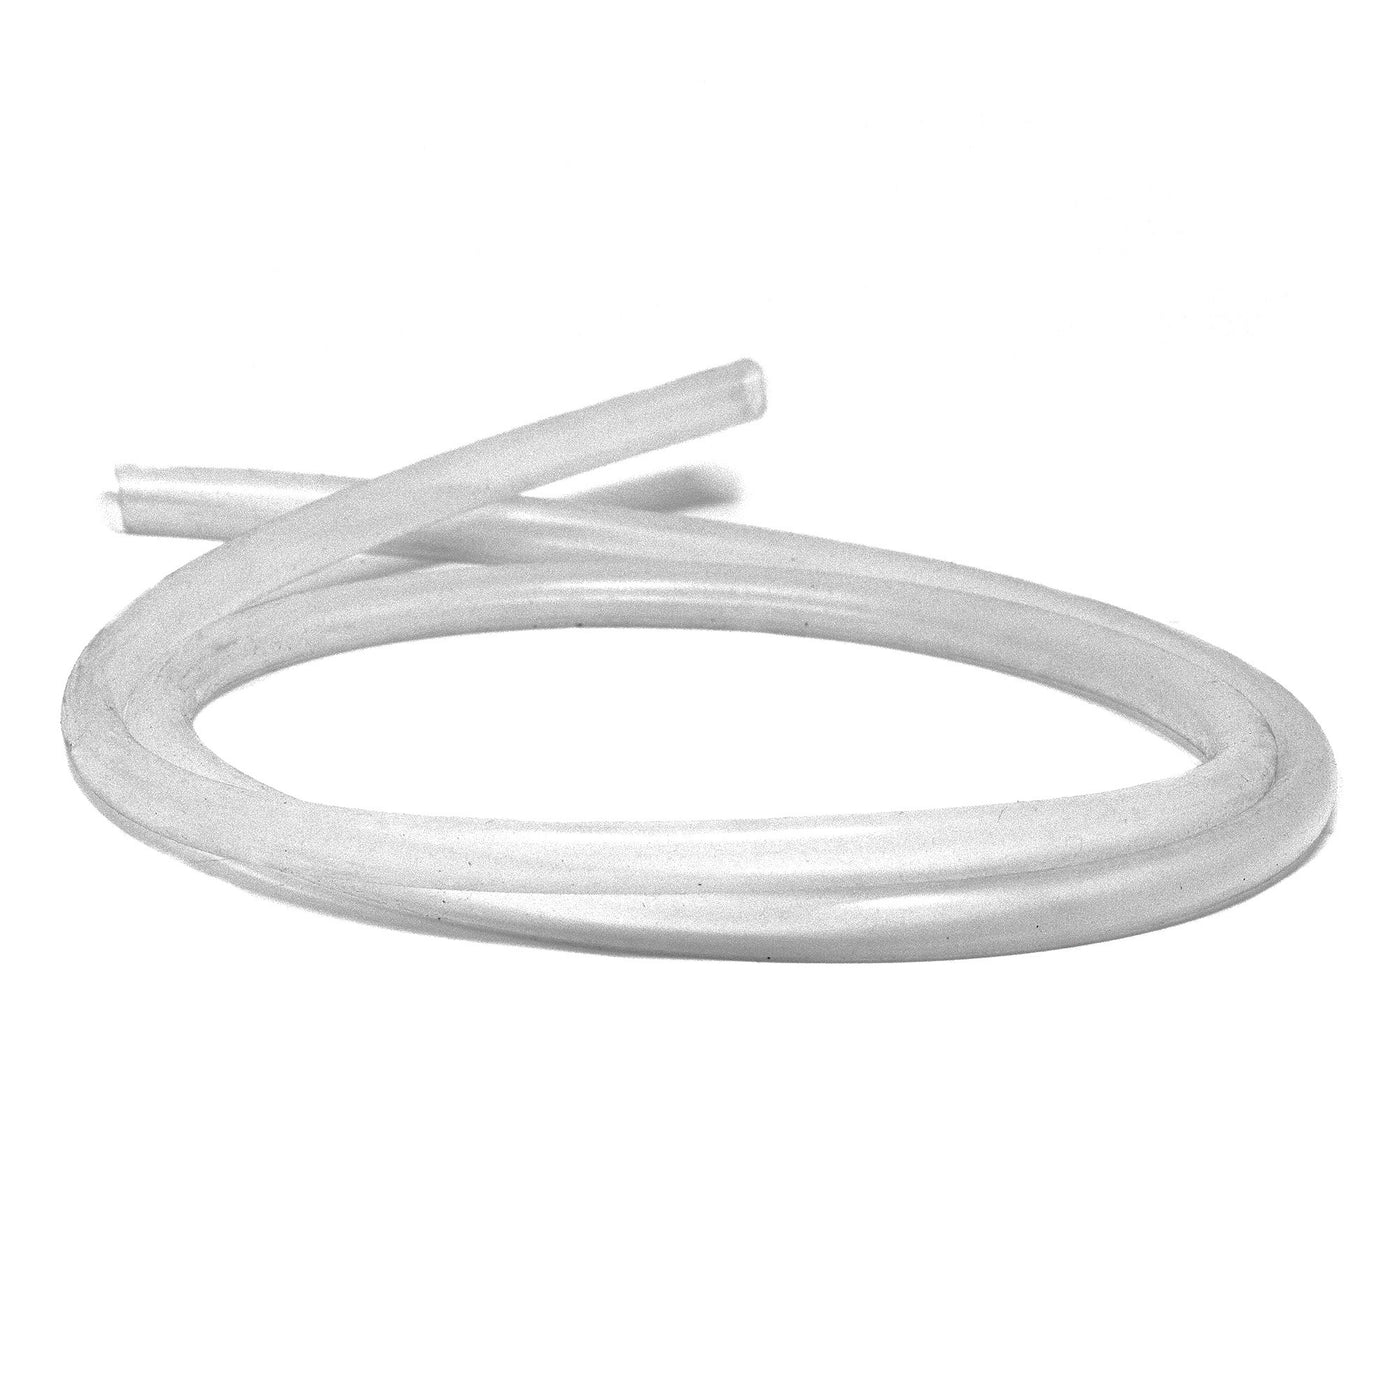 Rocket 9x12 Silicone Tubing - PRT353F6720 - Coiled up